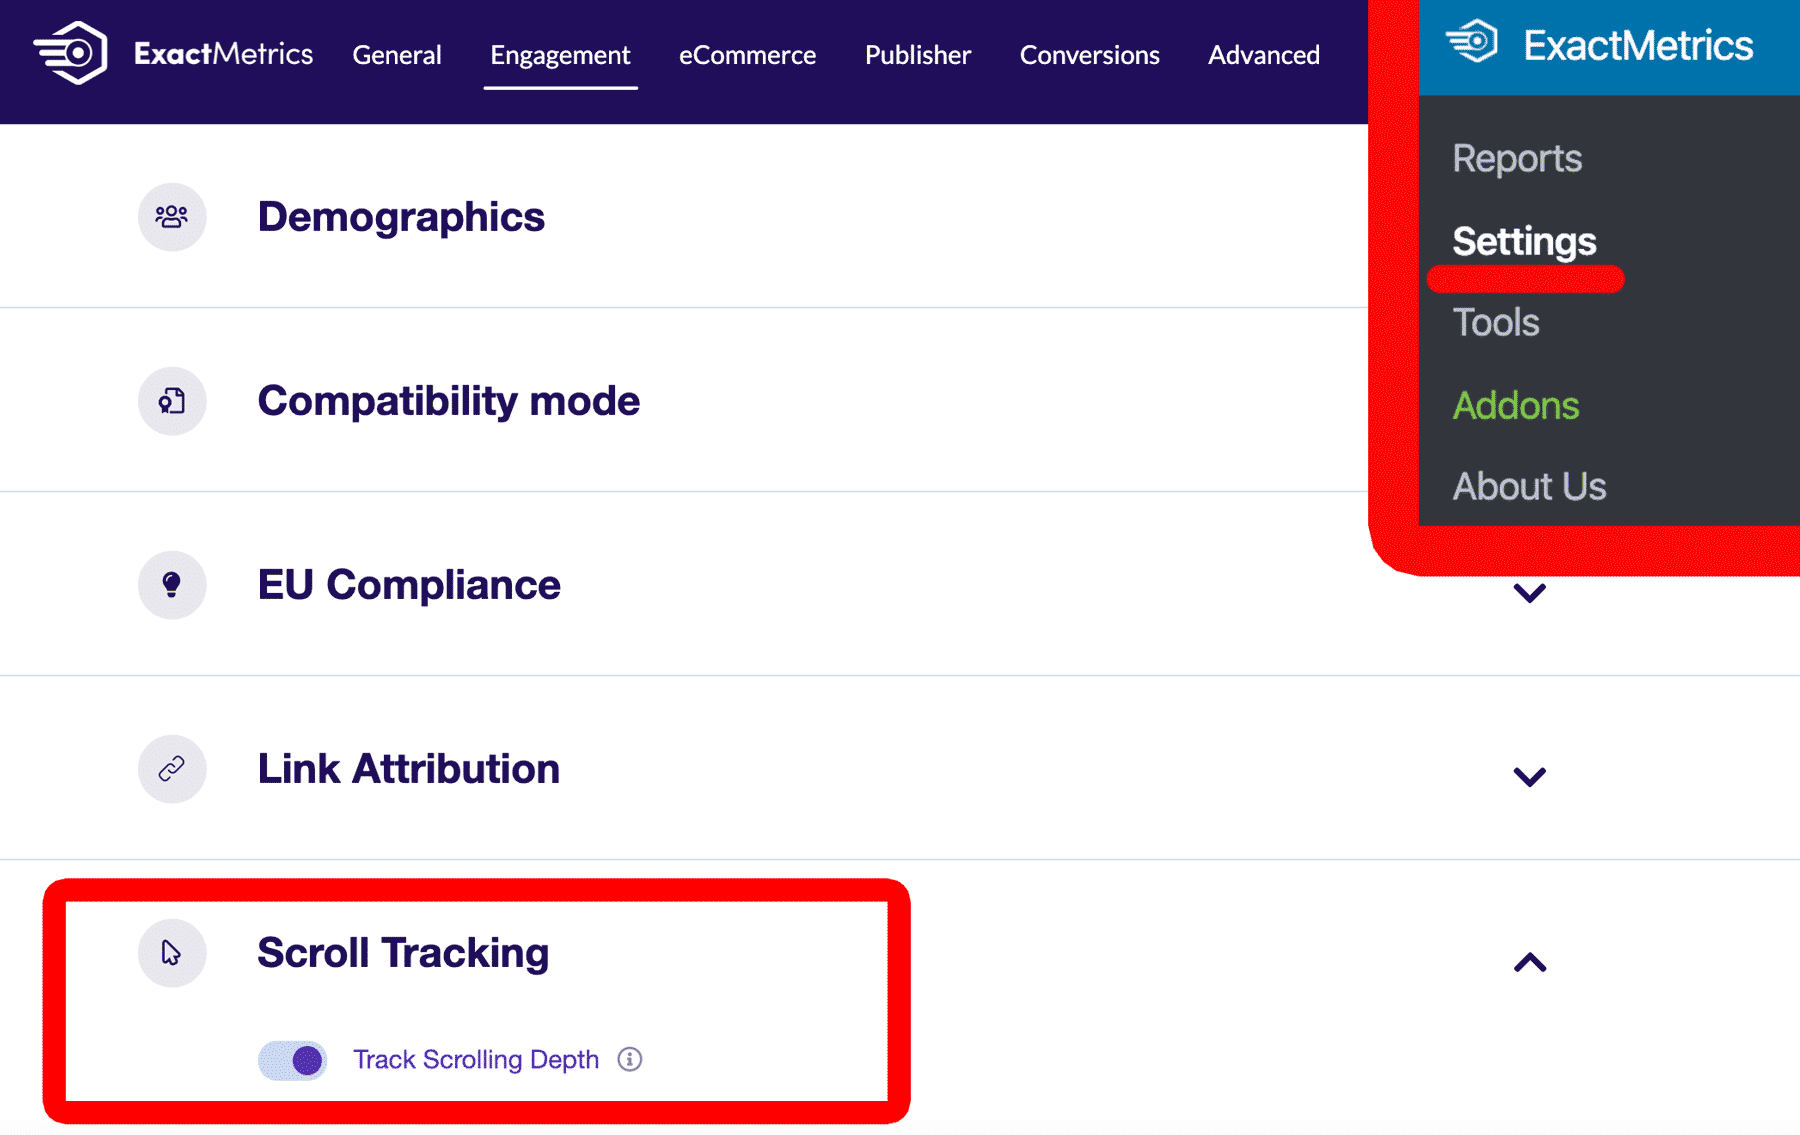 enable scroll tracking from settings